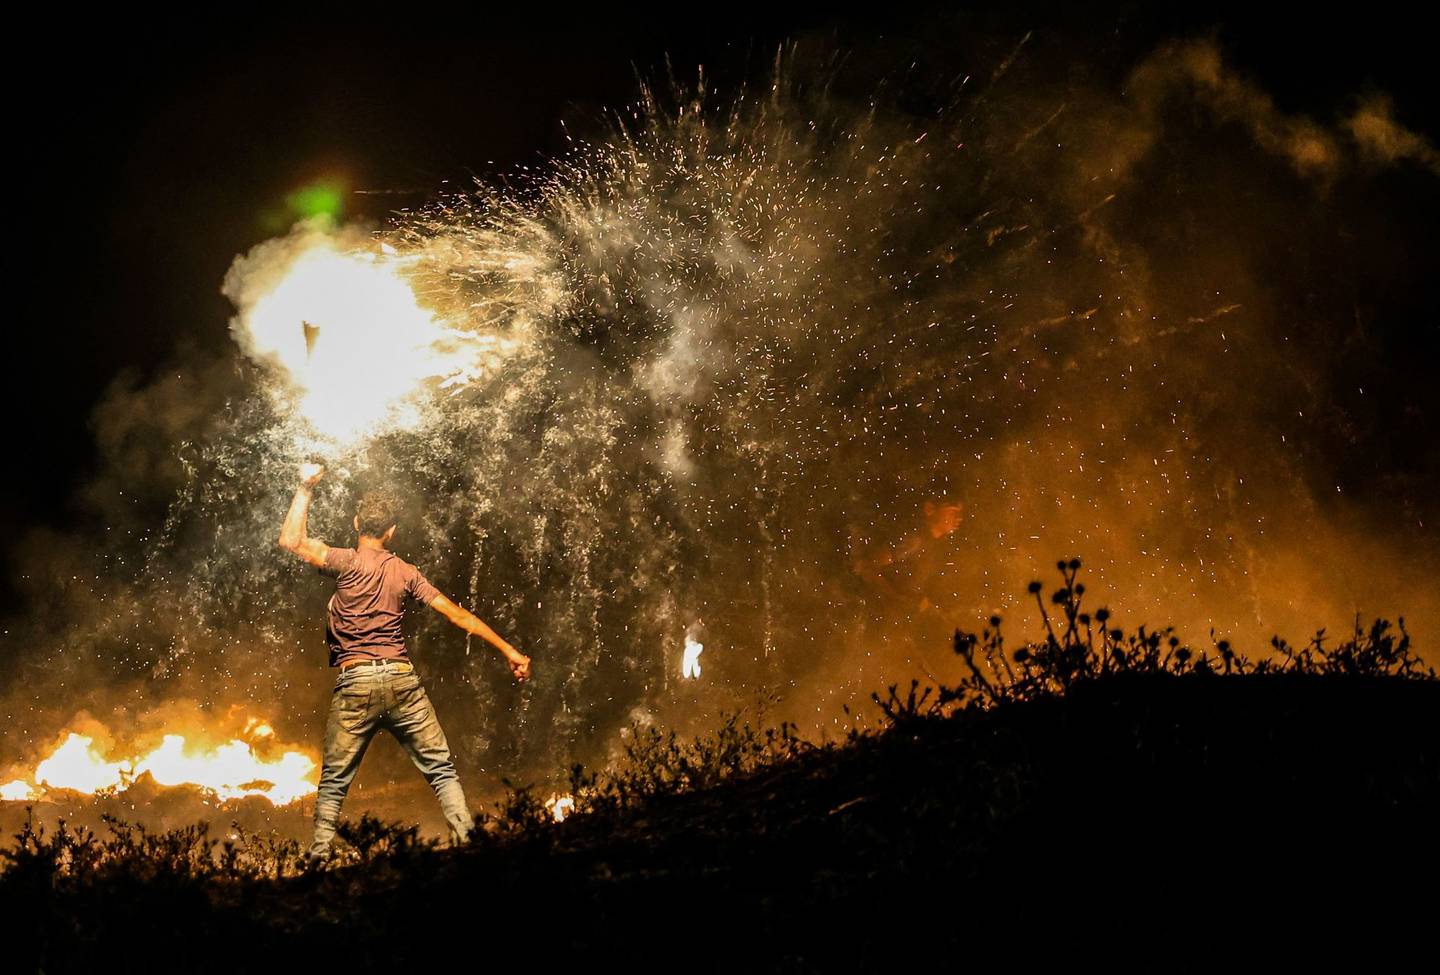 A Palestinian protester throws a burning projectile towards Israeli forces during a demonstration east of Gaza City by the border with Israel, on June 15, 2021, to protest the Israeli ultranationalist March of the Flags in Jerusalem's Old City which celebrates the anniversary of Israel's 1967 occupation of Jerusalem's eastern sector. (Photo by MAHMUD HAMS / AFP)